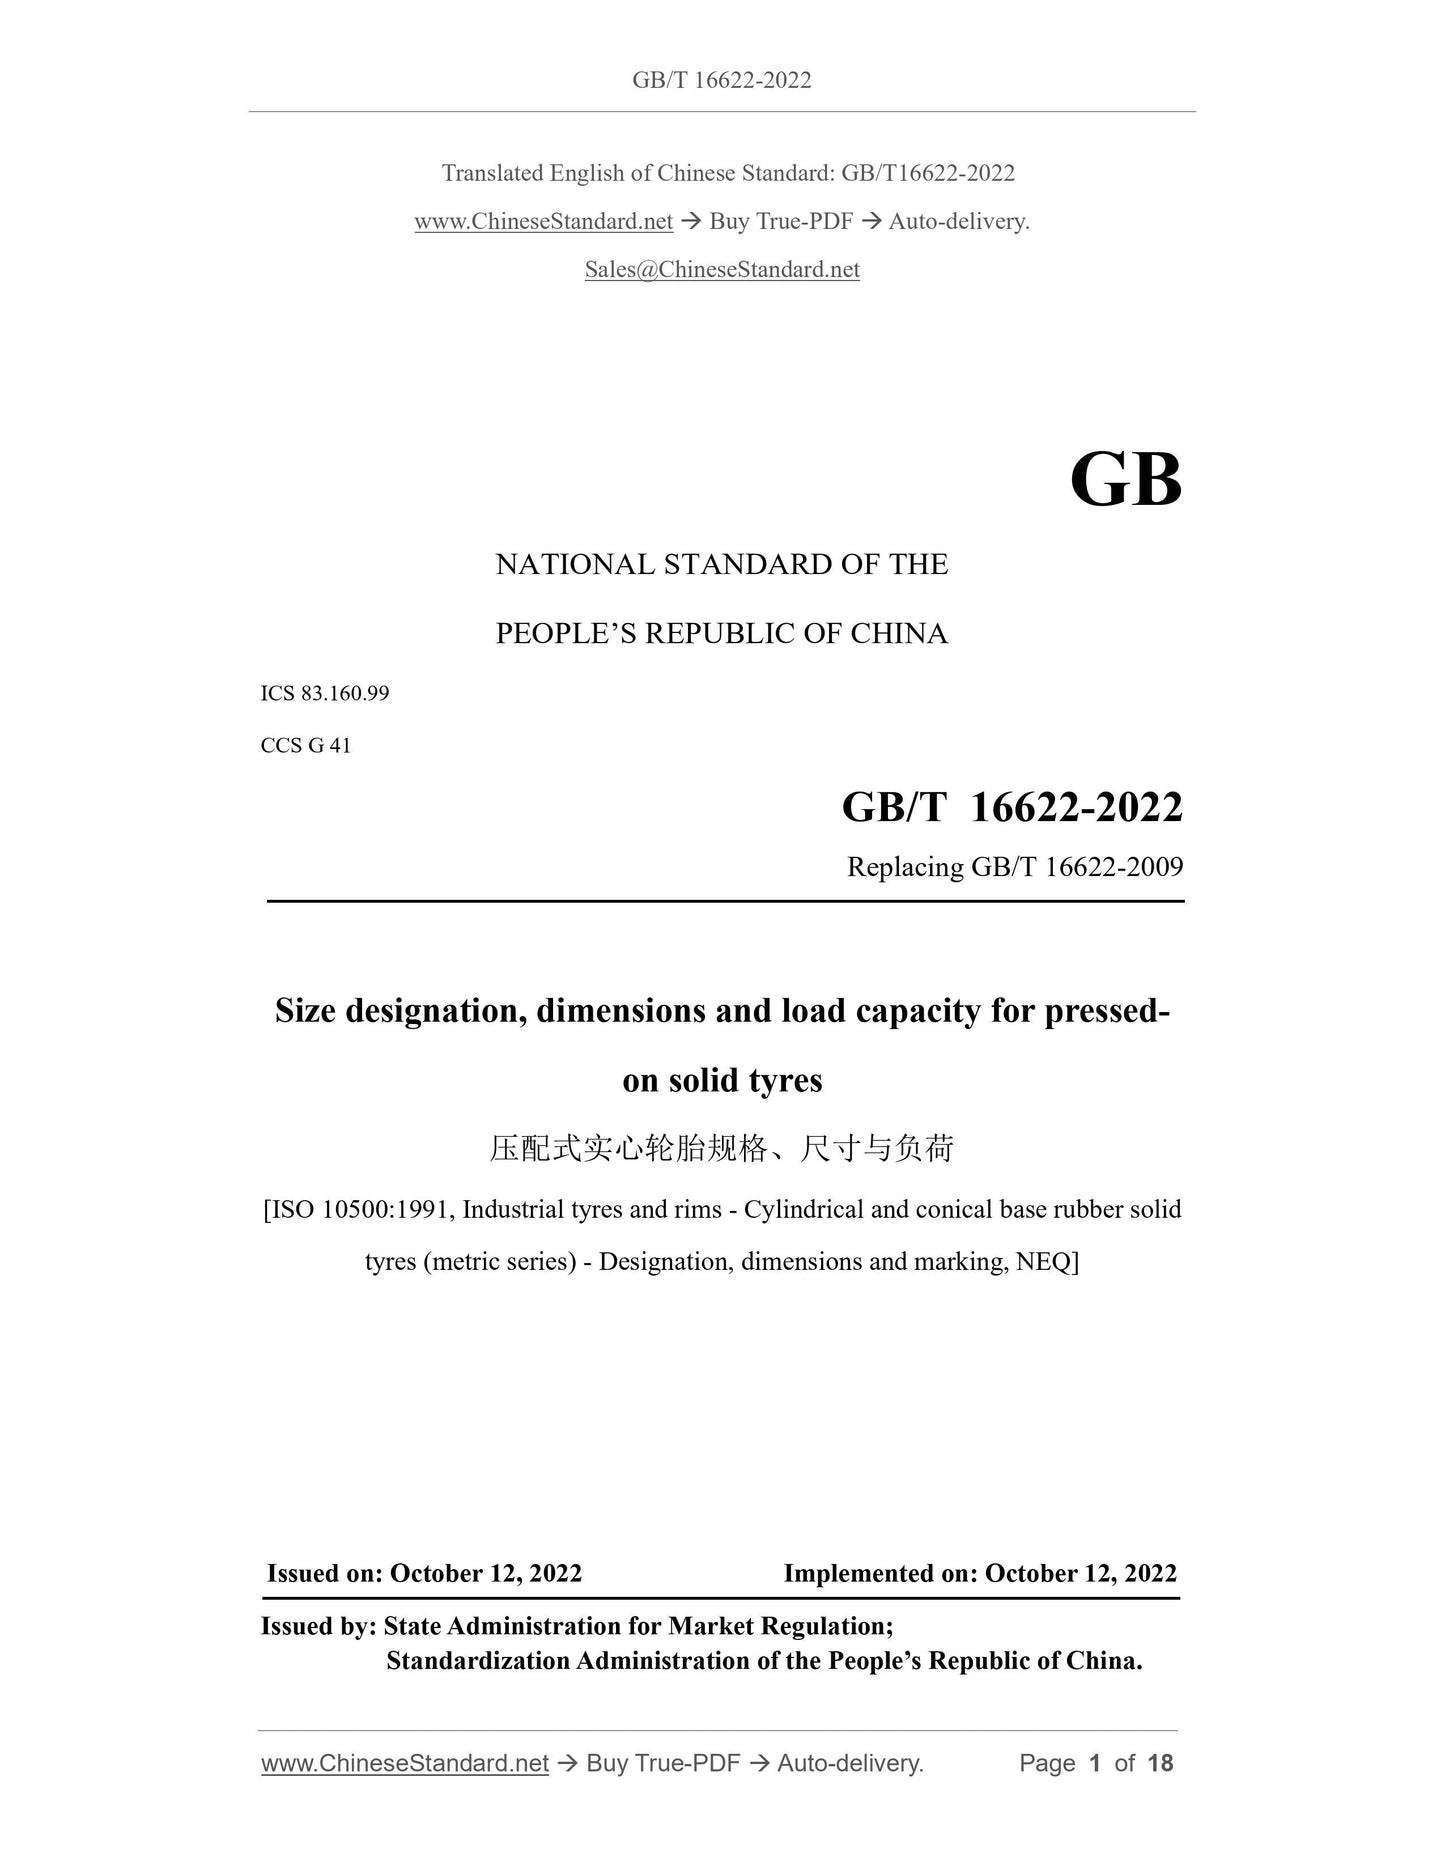 GB/T 16622-2022 Page 1